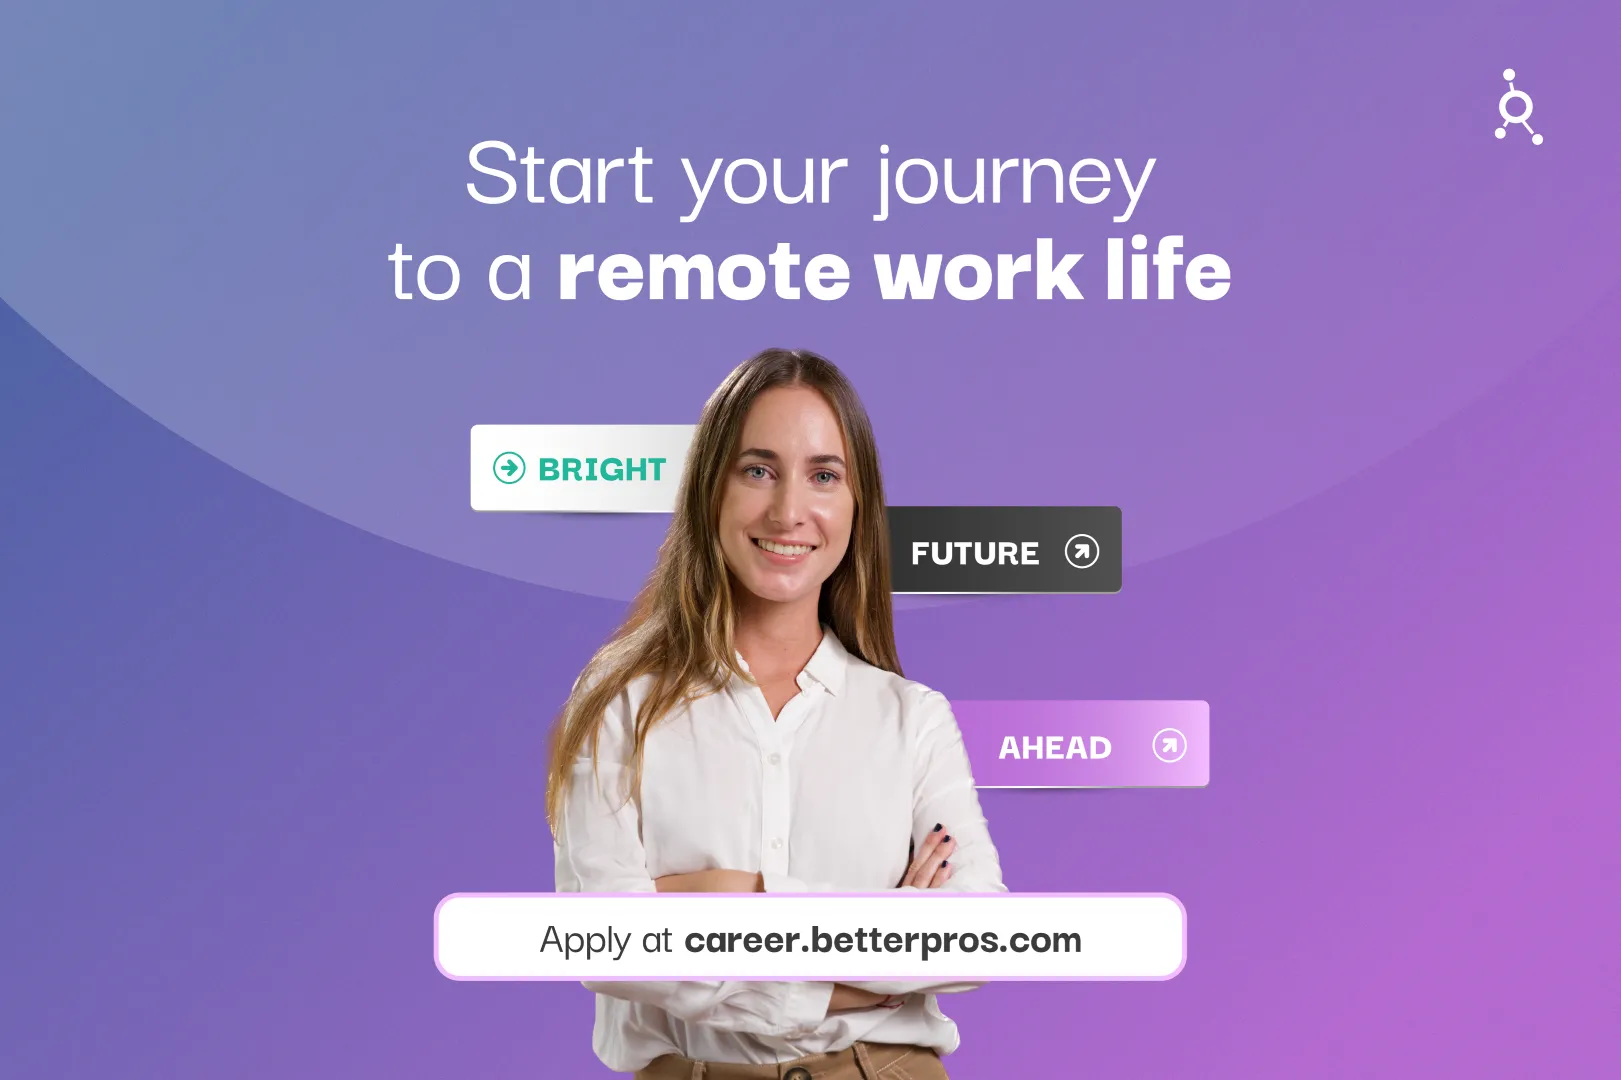 Full time remote positions